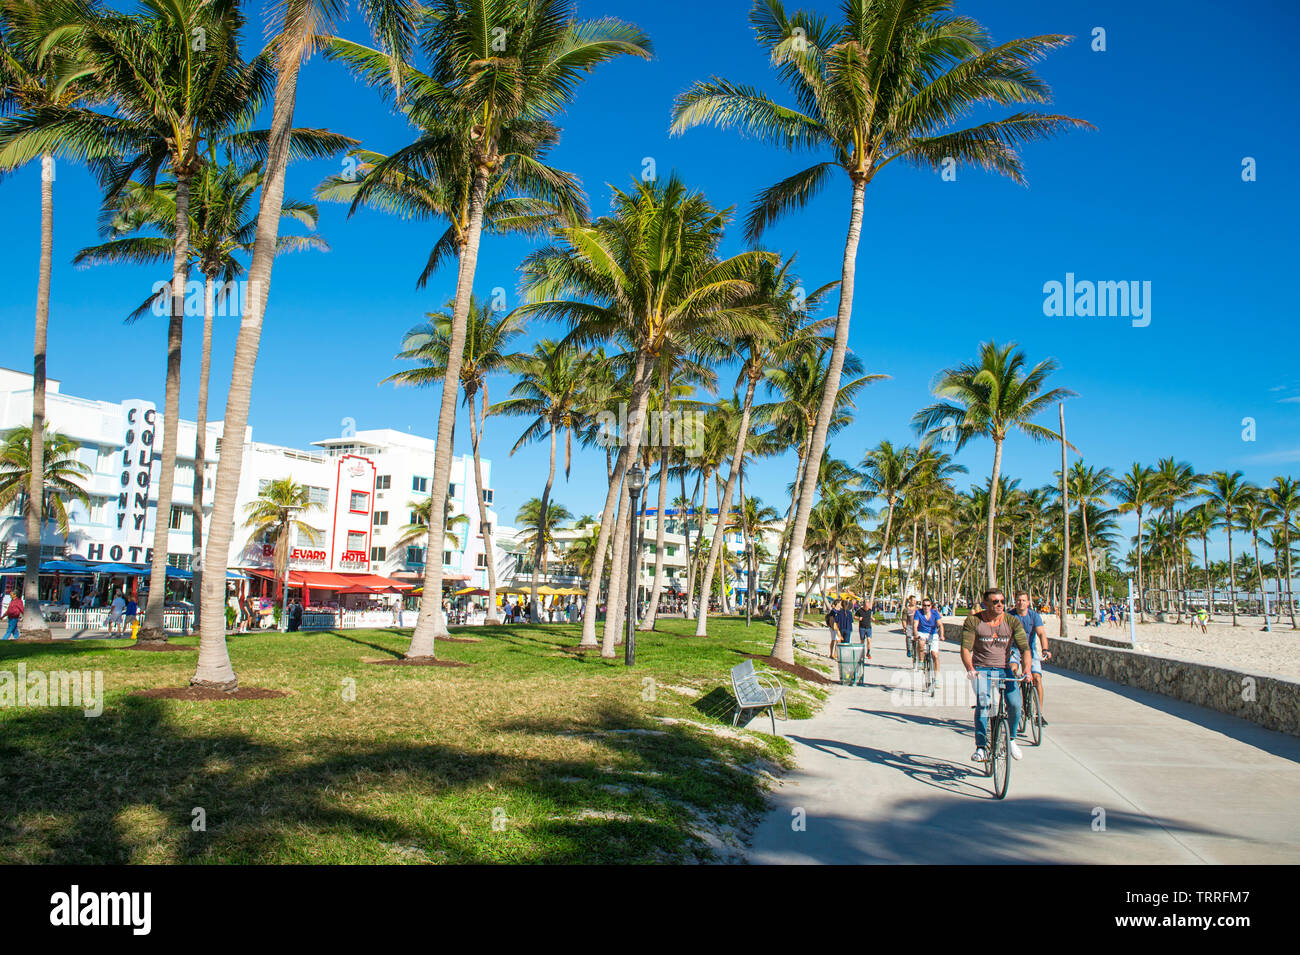 MIAMI - DECEMBER 27, 2017: A group of cyclists ride along the beachfront boardwalk promenade at Lummus Park in South Beach. Stock Photo